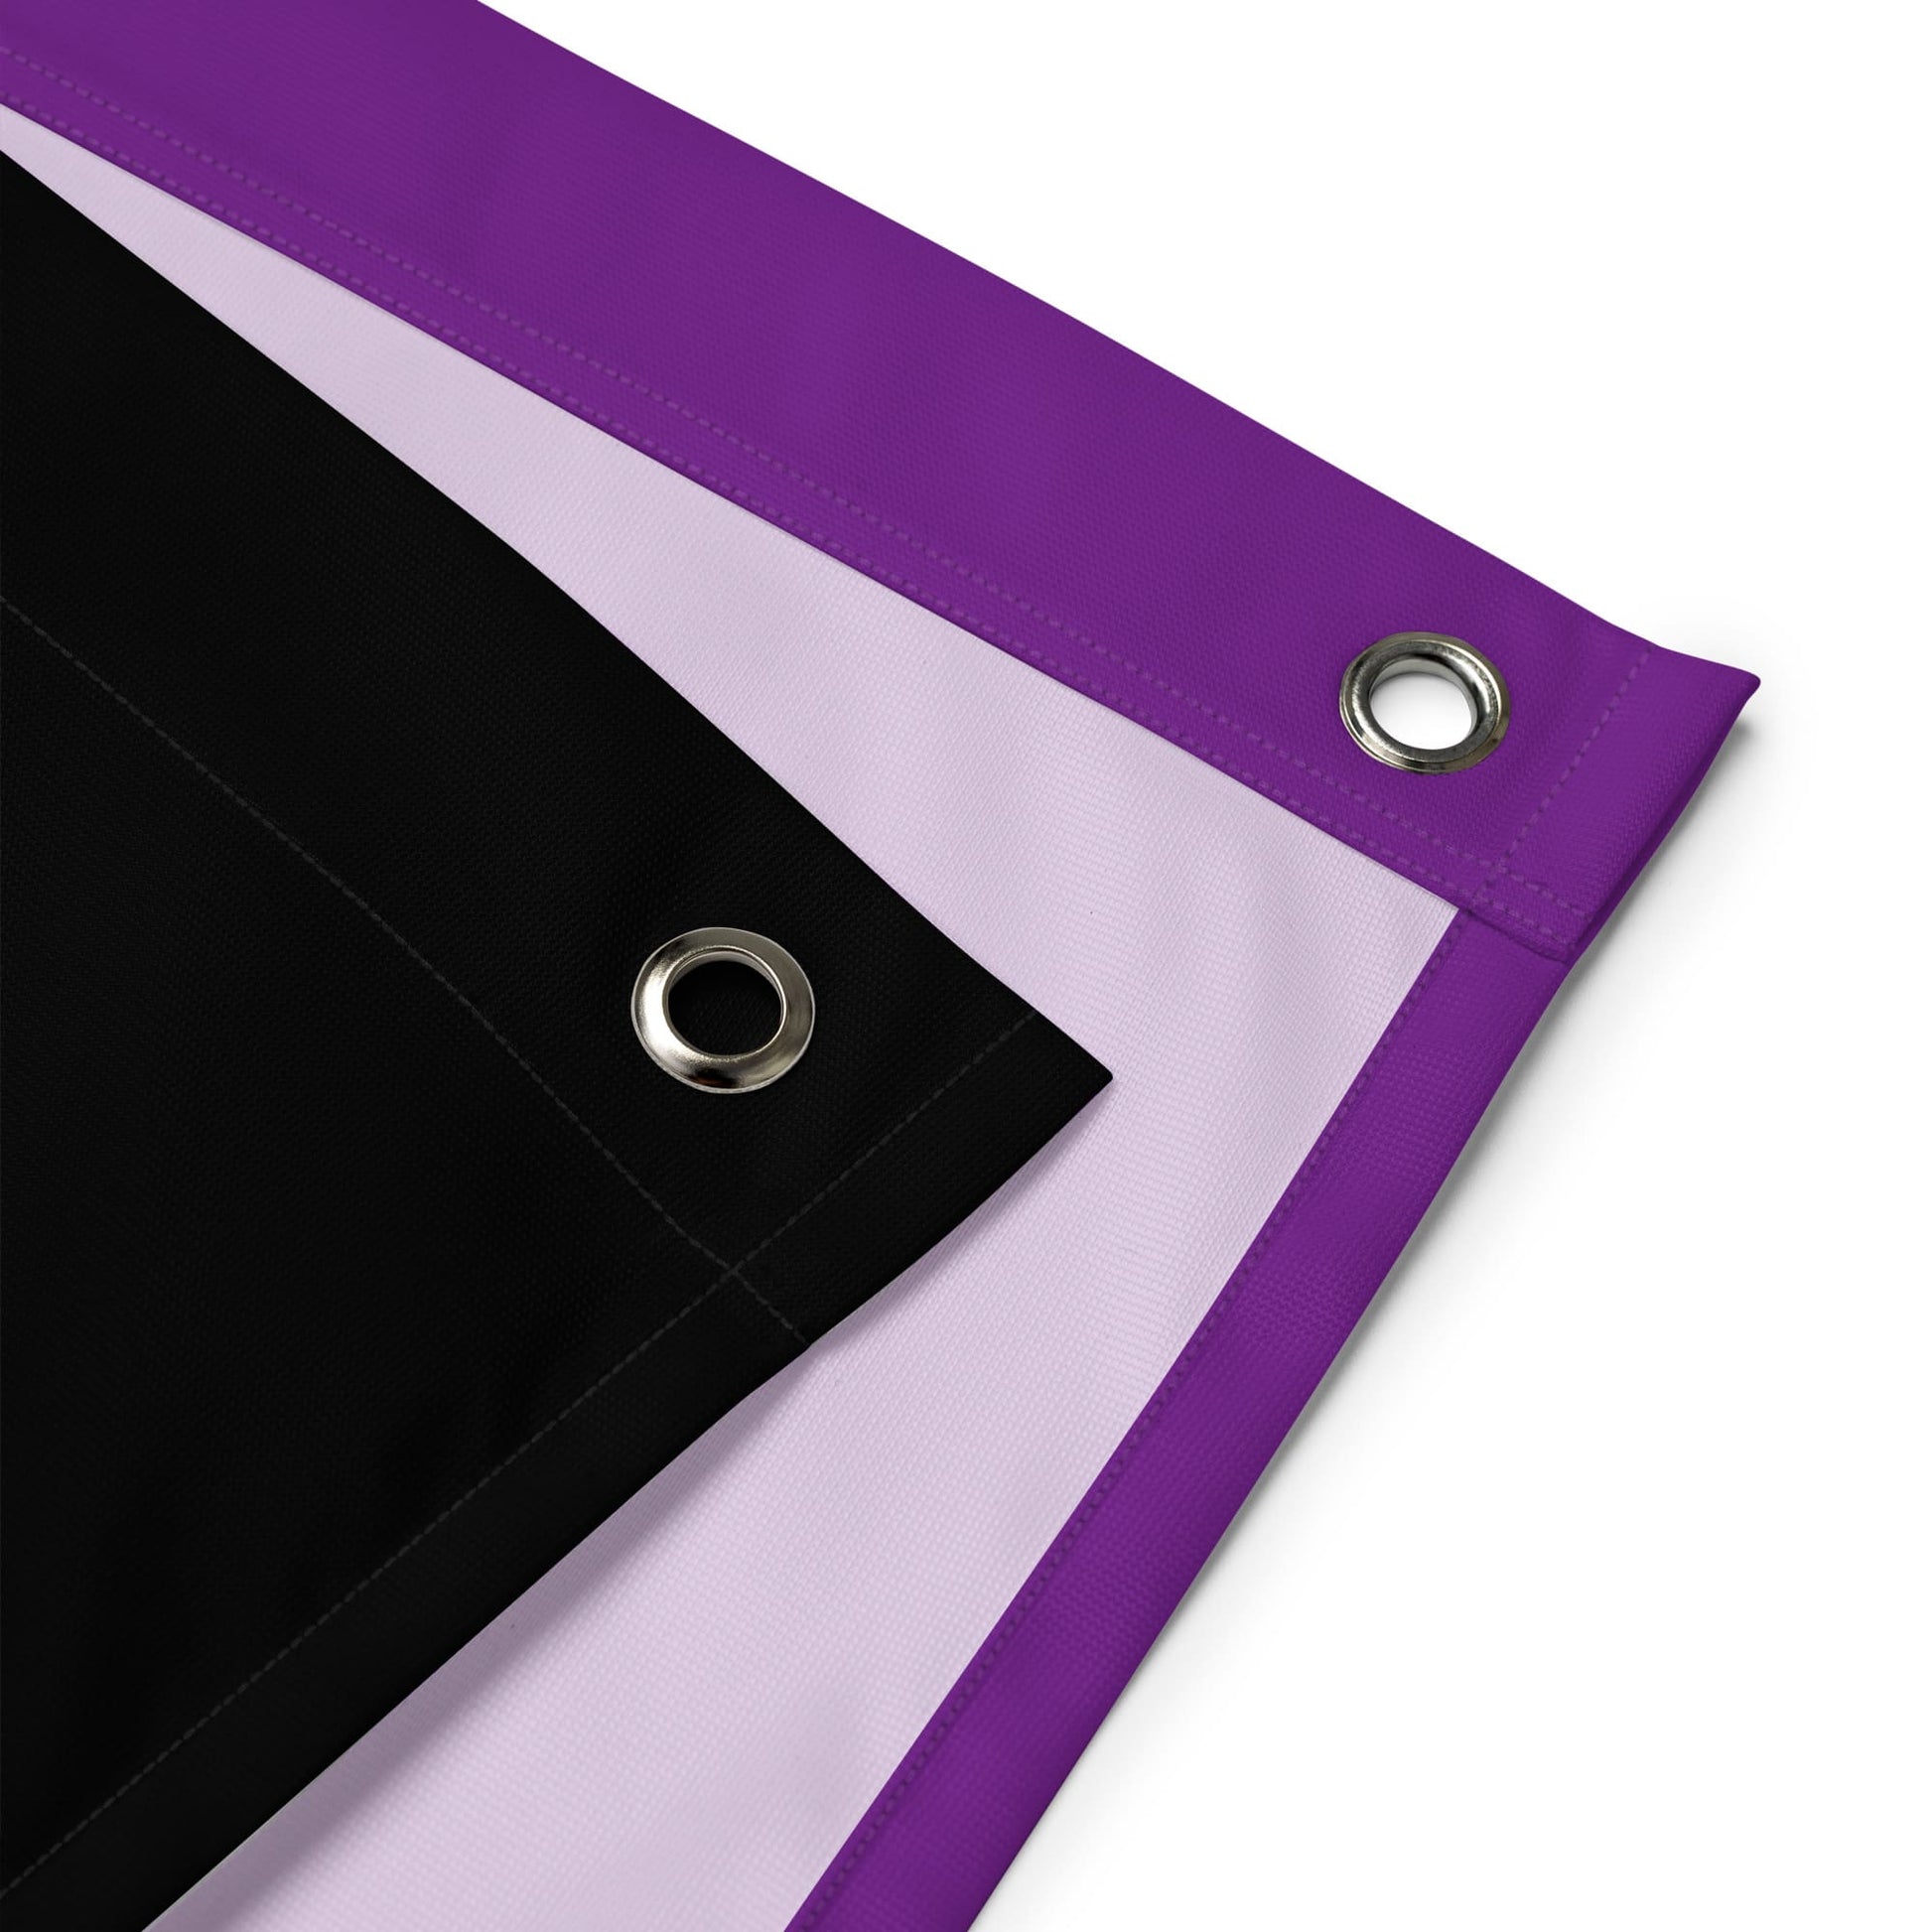 Asexual flag wall tapestry, detail grommets